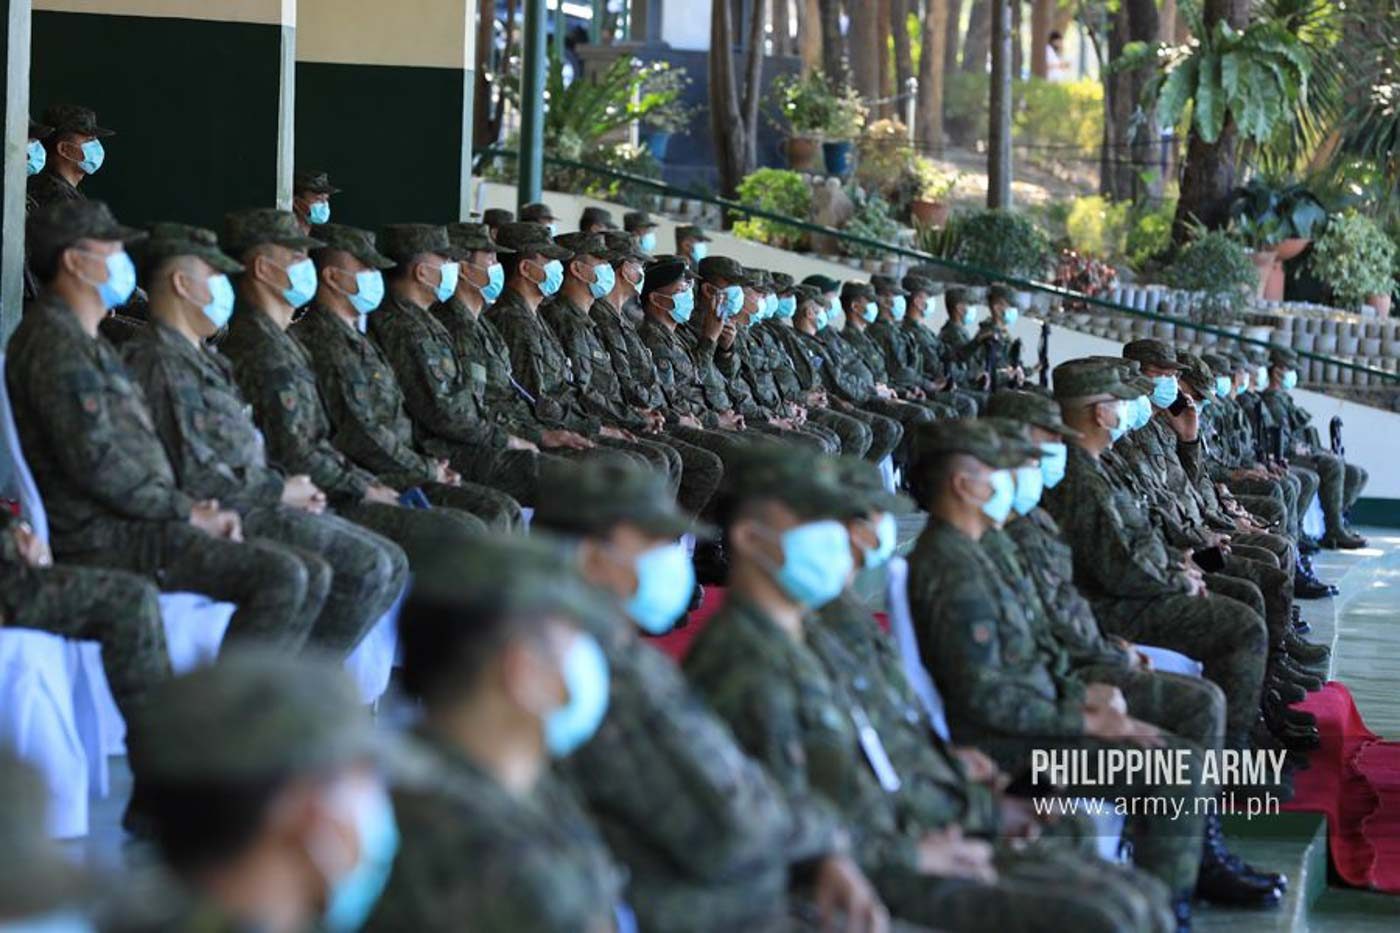 ARMY TROOPS. The Philippine Army marks its 123rd anniversary on March 23, 2020, amid an outbreak of the novel coronavirus. Photo from the Philippine Army 